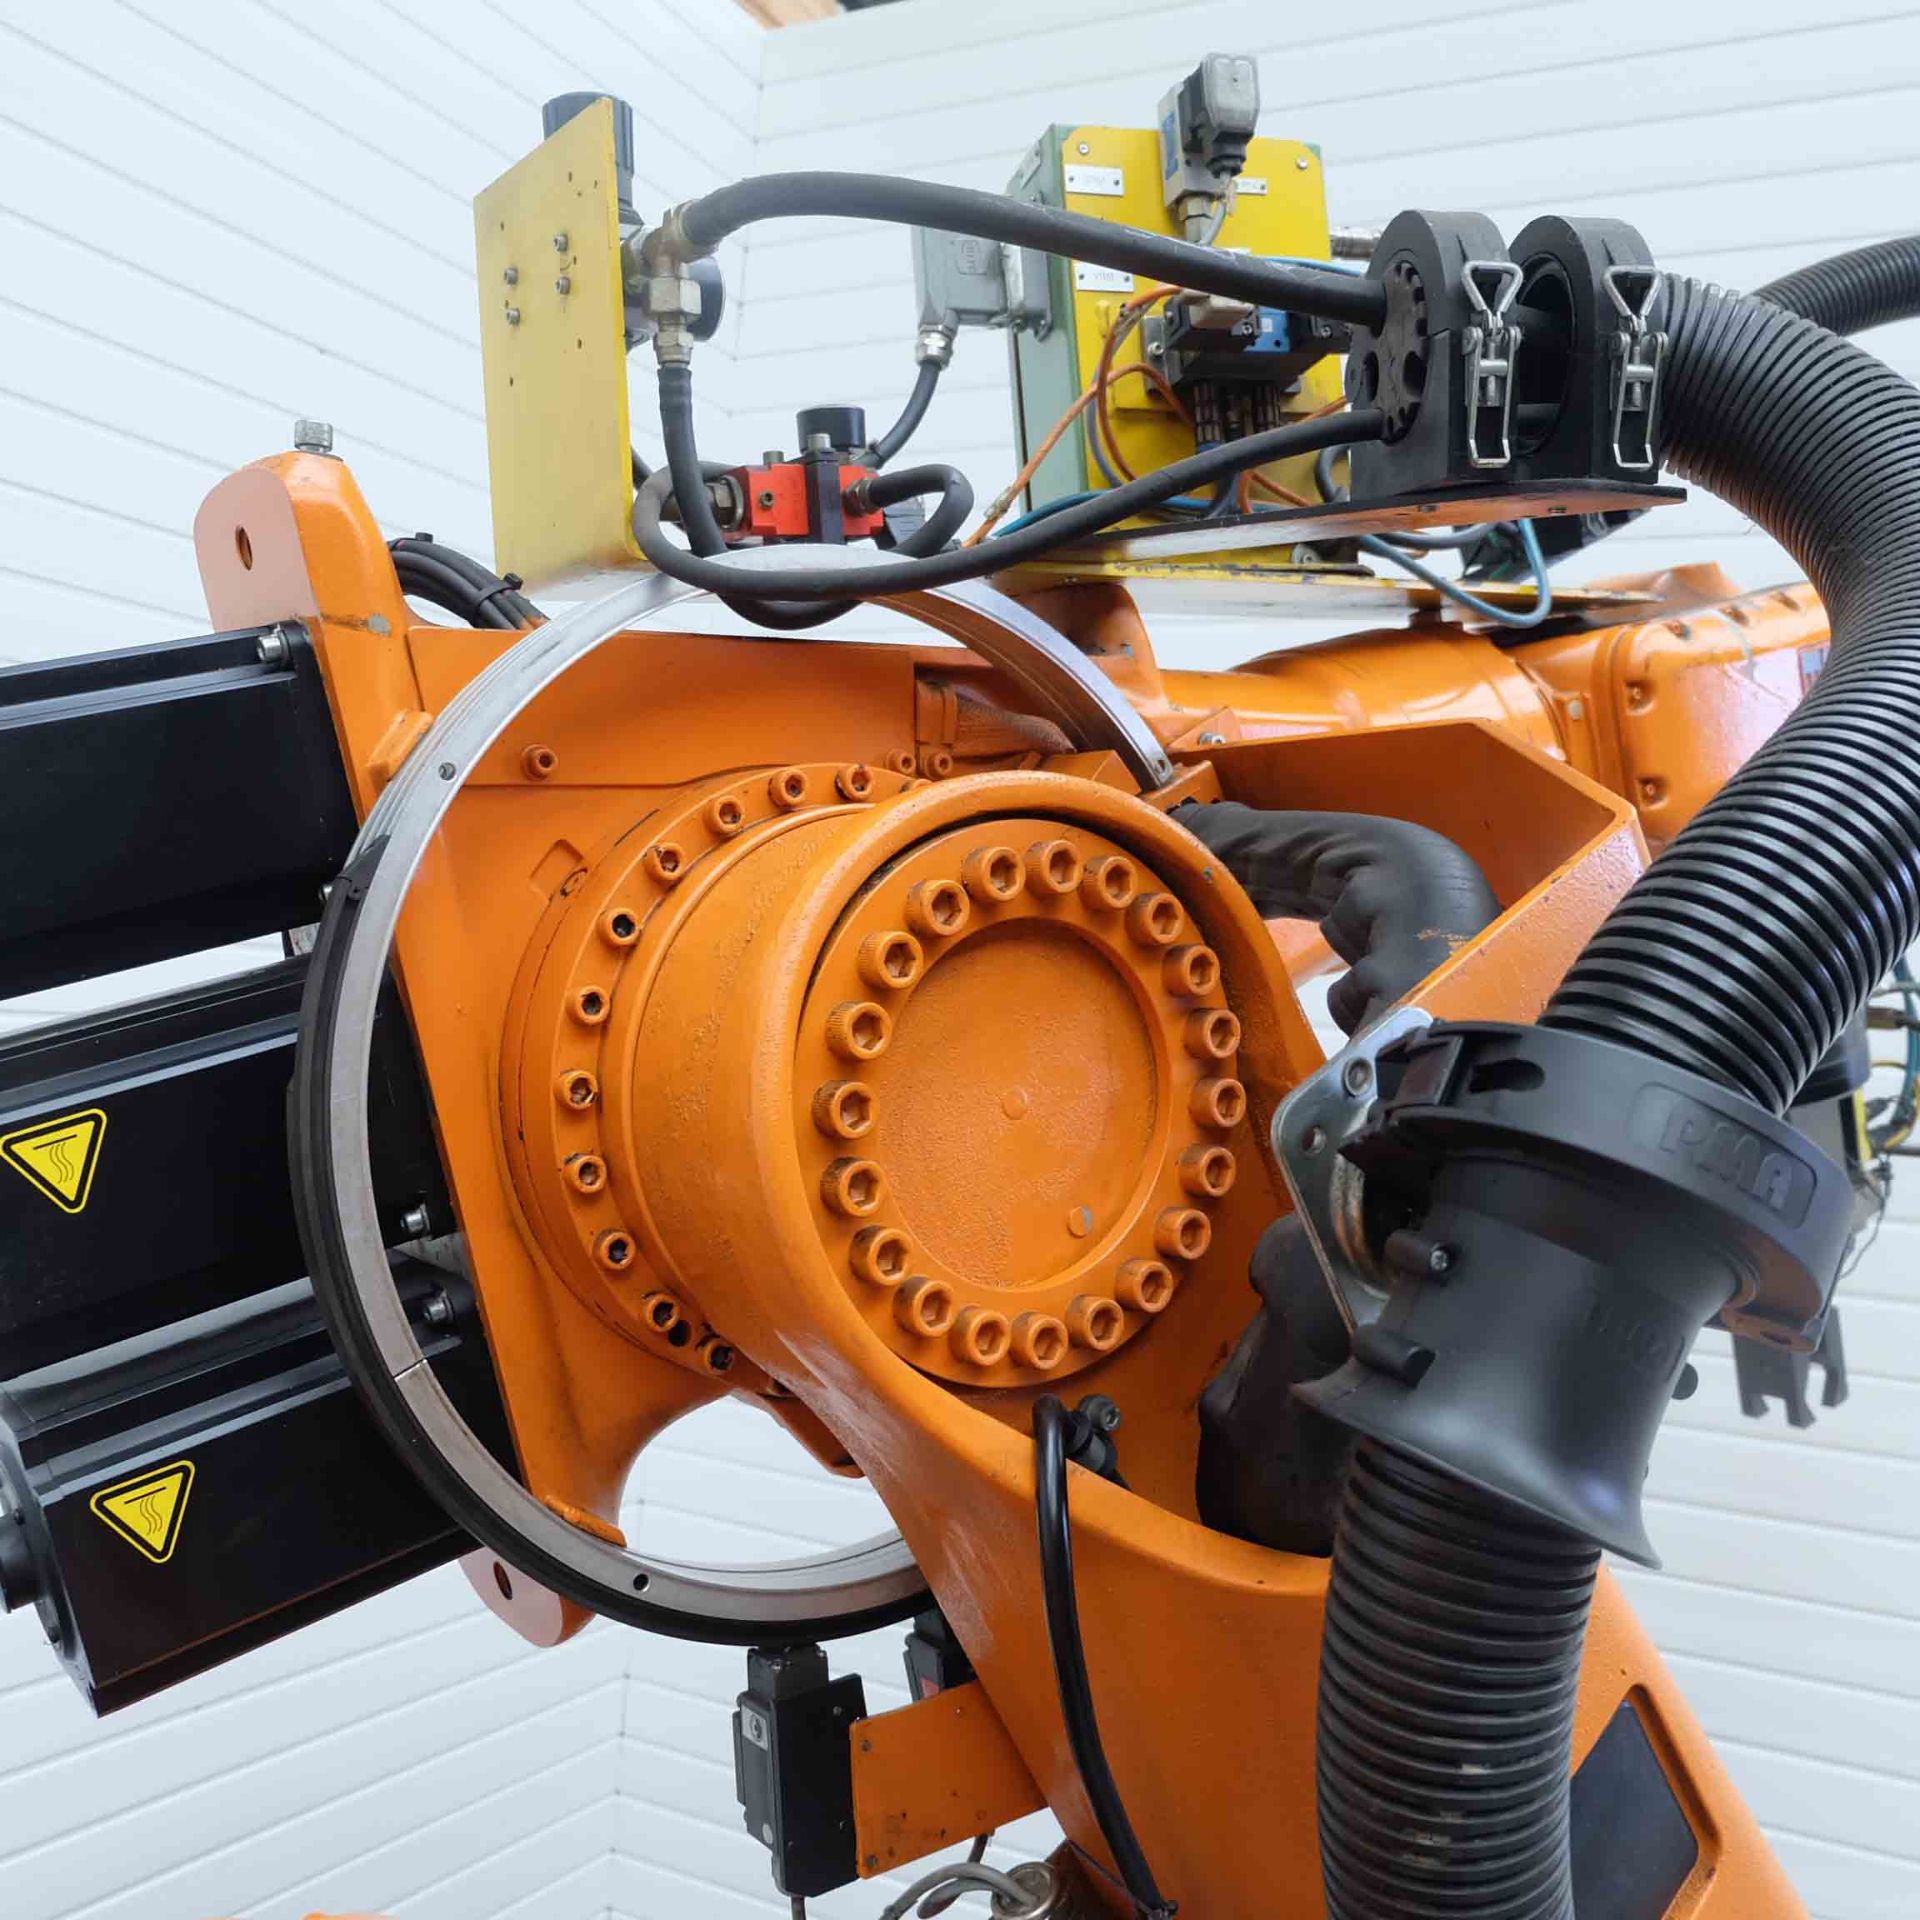 2 x Kuka Type KR125 6 Axis Robotic Arms. (1 Complete & 1 Incomplete). - Image 31 of 35